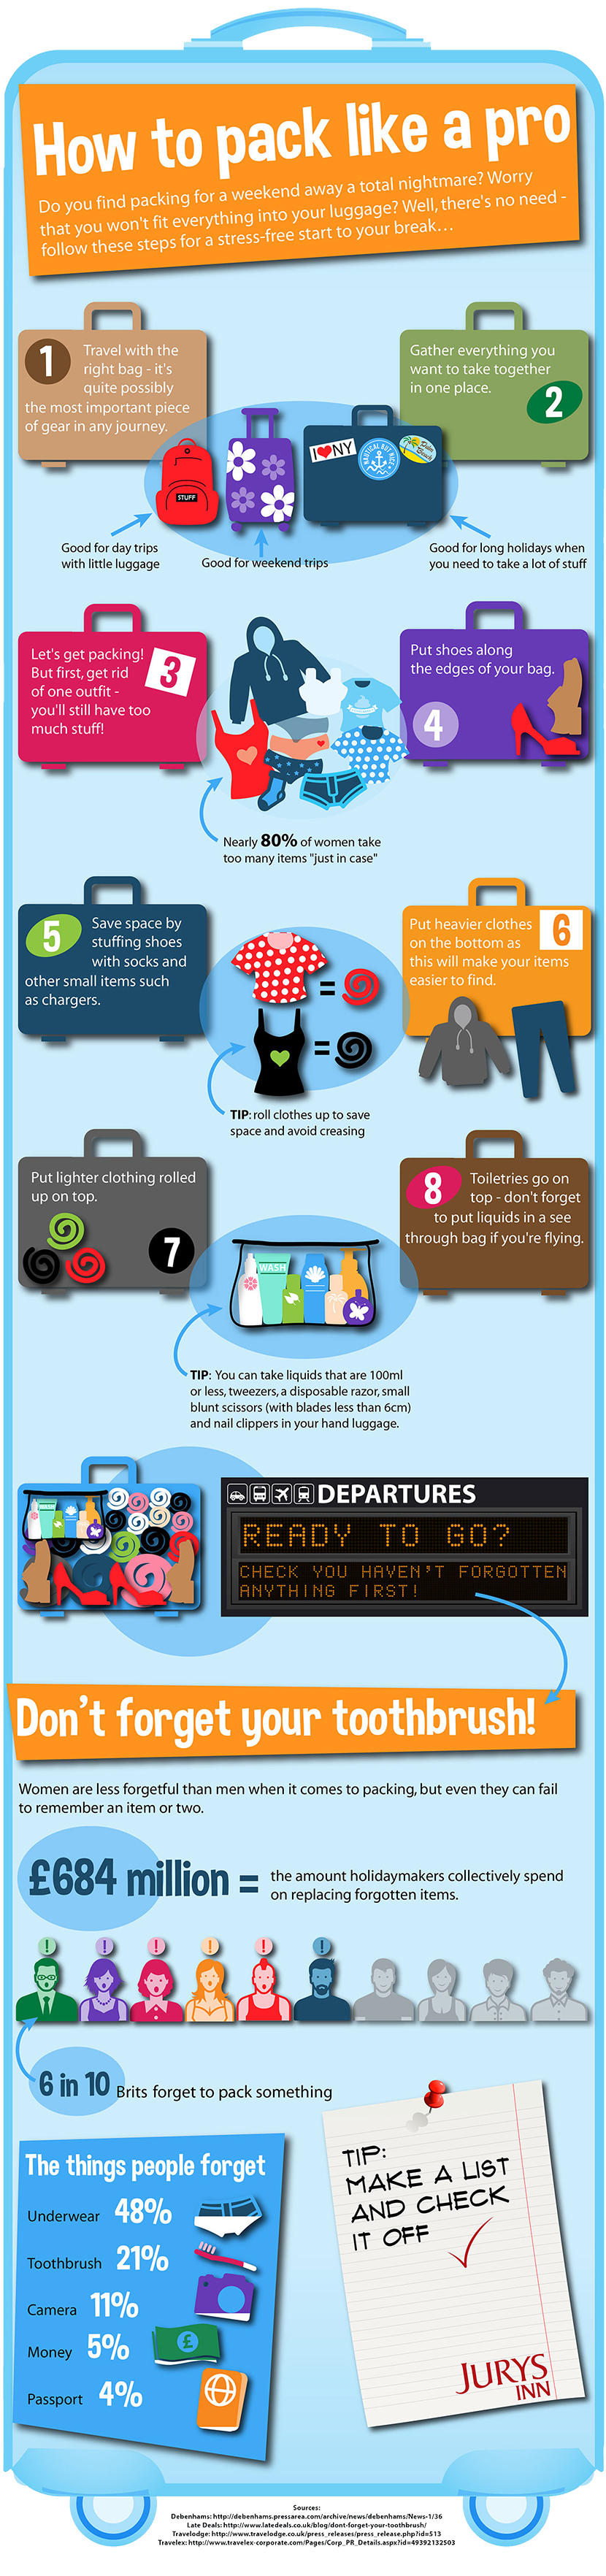 Infographic - How to pack like a pro